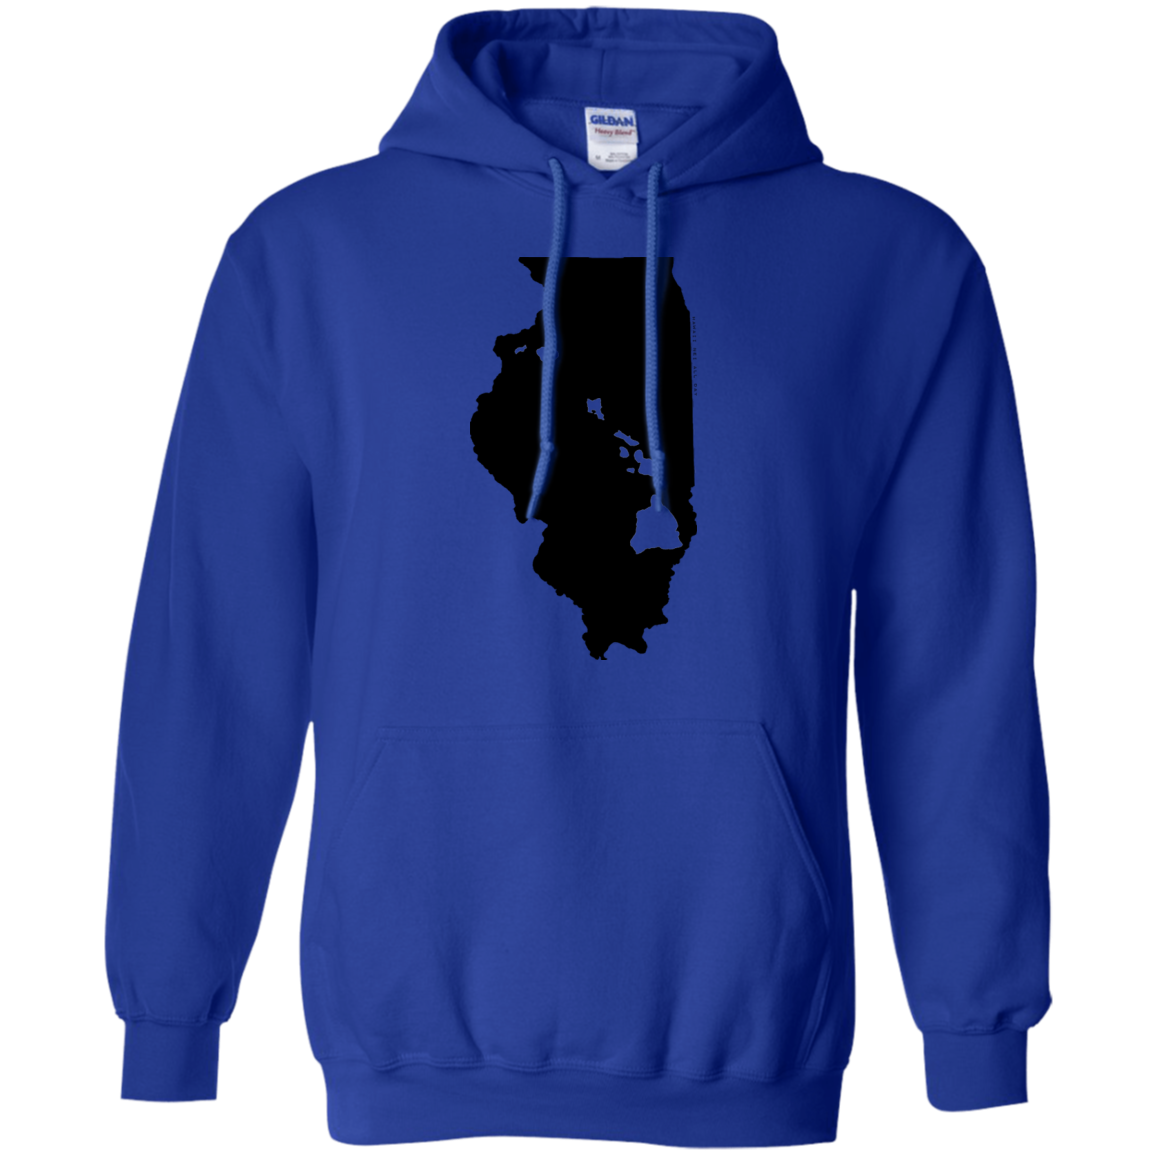 Living in Illinois with Hawaii Roots Pullover Hoodie 8 oz., Sweatshirts, Hawaii Nei All Day